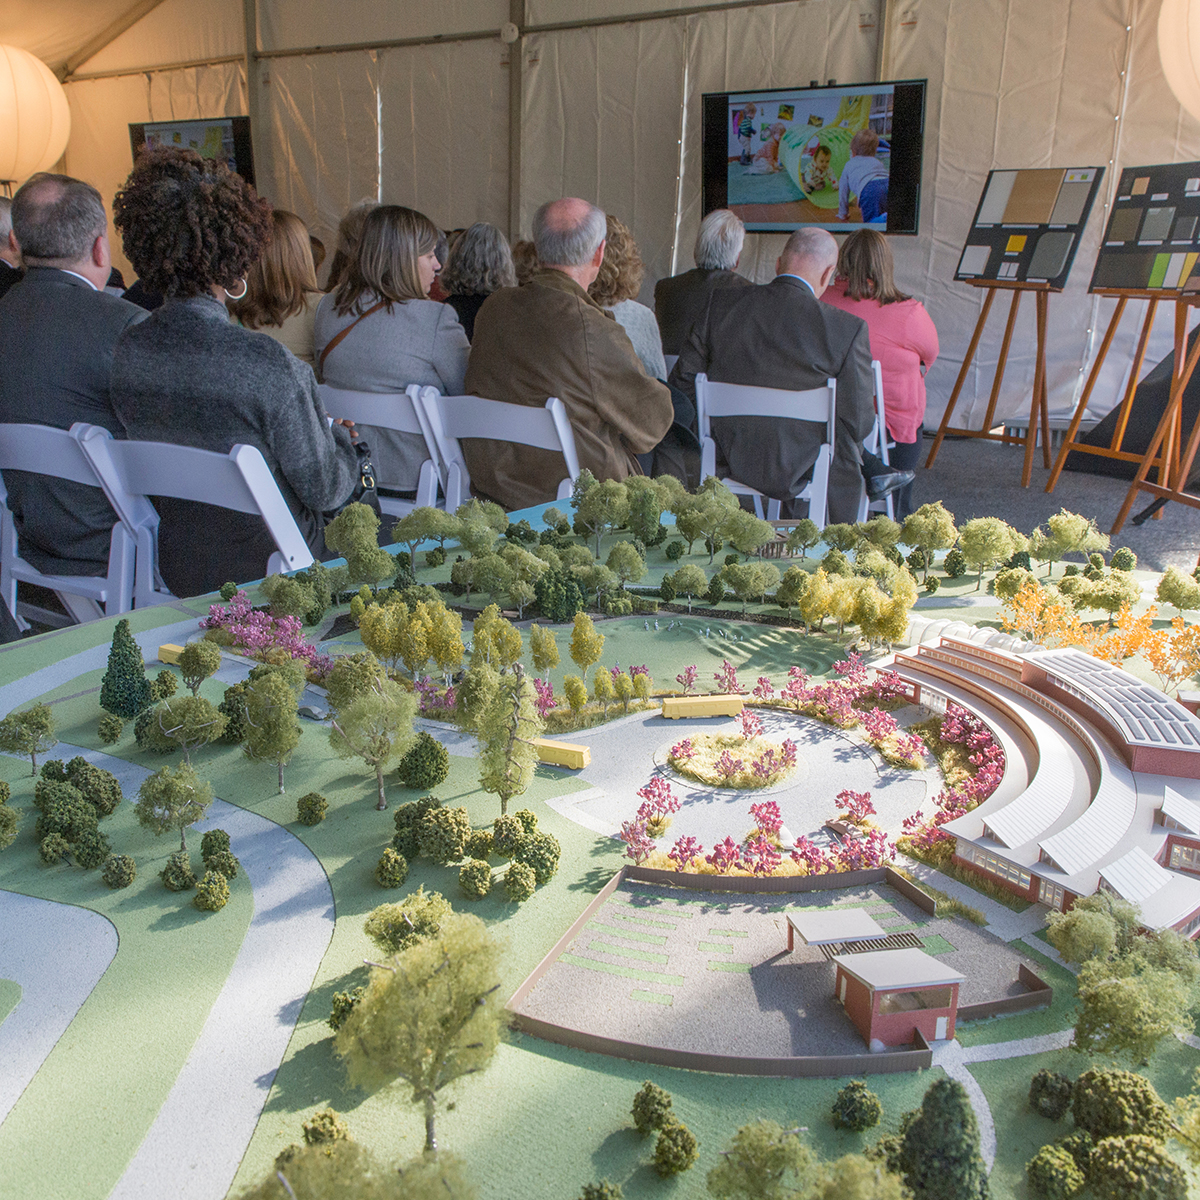 PHOTO: The groundbreaking ceremony; with model of the campus in the foreground.